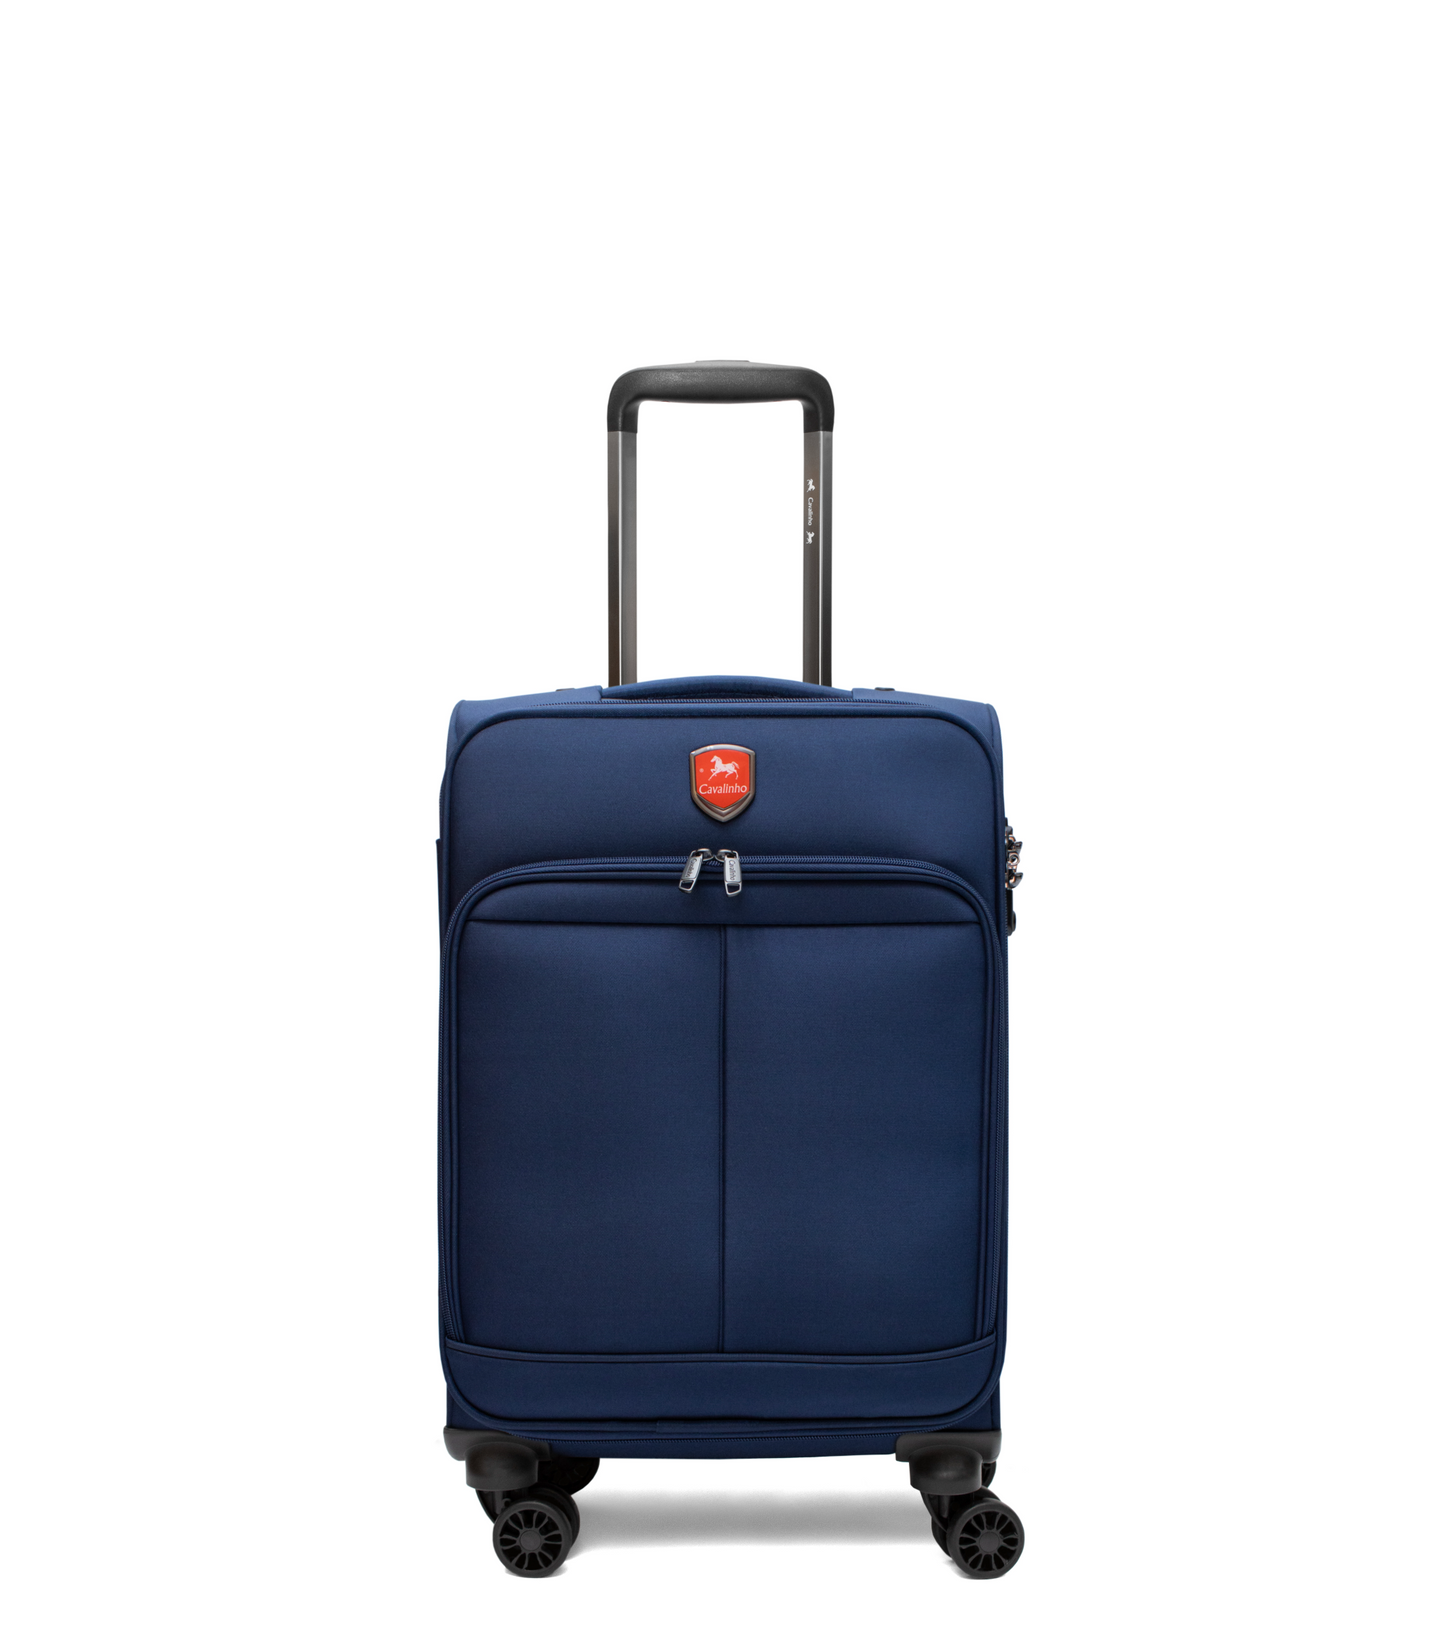 Cavalinho Carry-on Softside Cabin Luggage (16" or 19") - 19 inch SteelBlue - 68020003.03.19_1